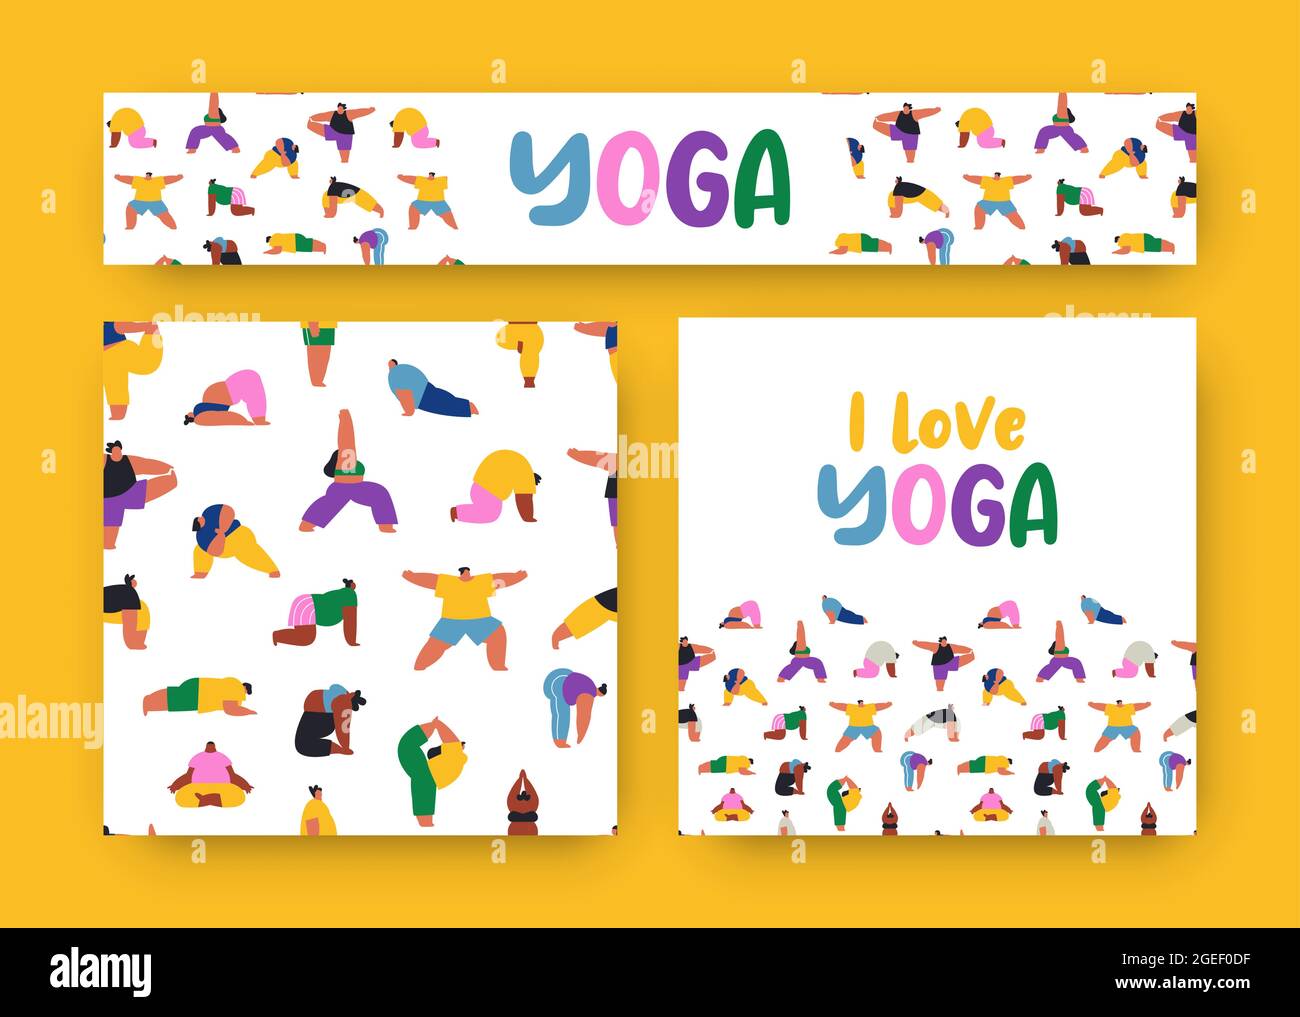 I love yoga banner illustration set with seamless pattern for healthy lifestyle or leisure activity concept. Diverse young people group doing exercise Stock Vector